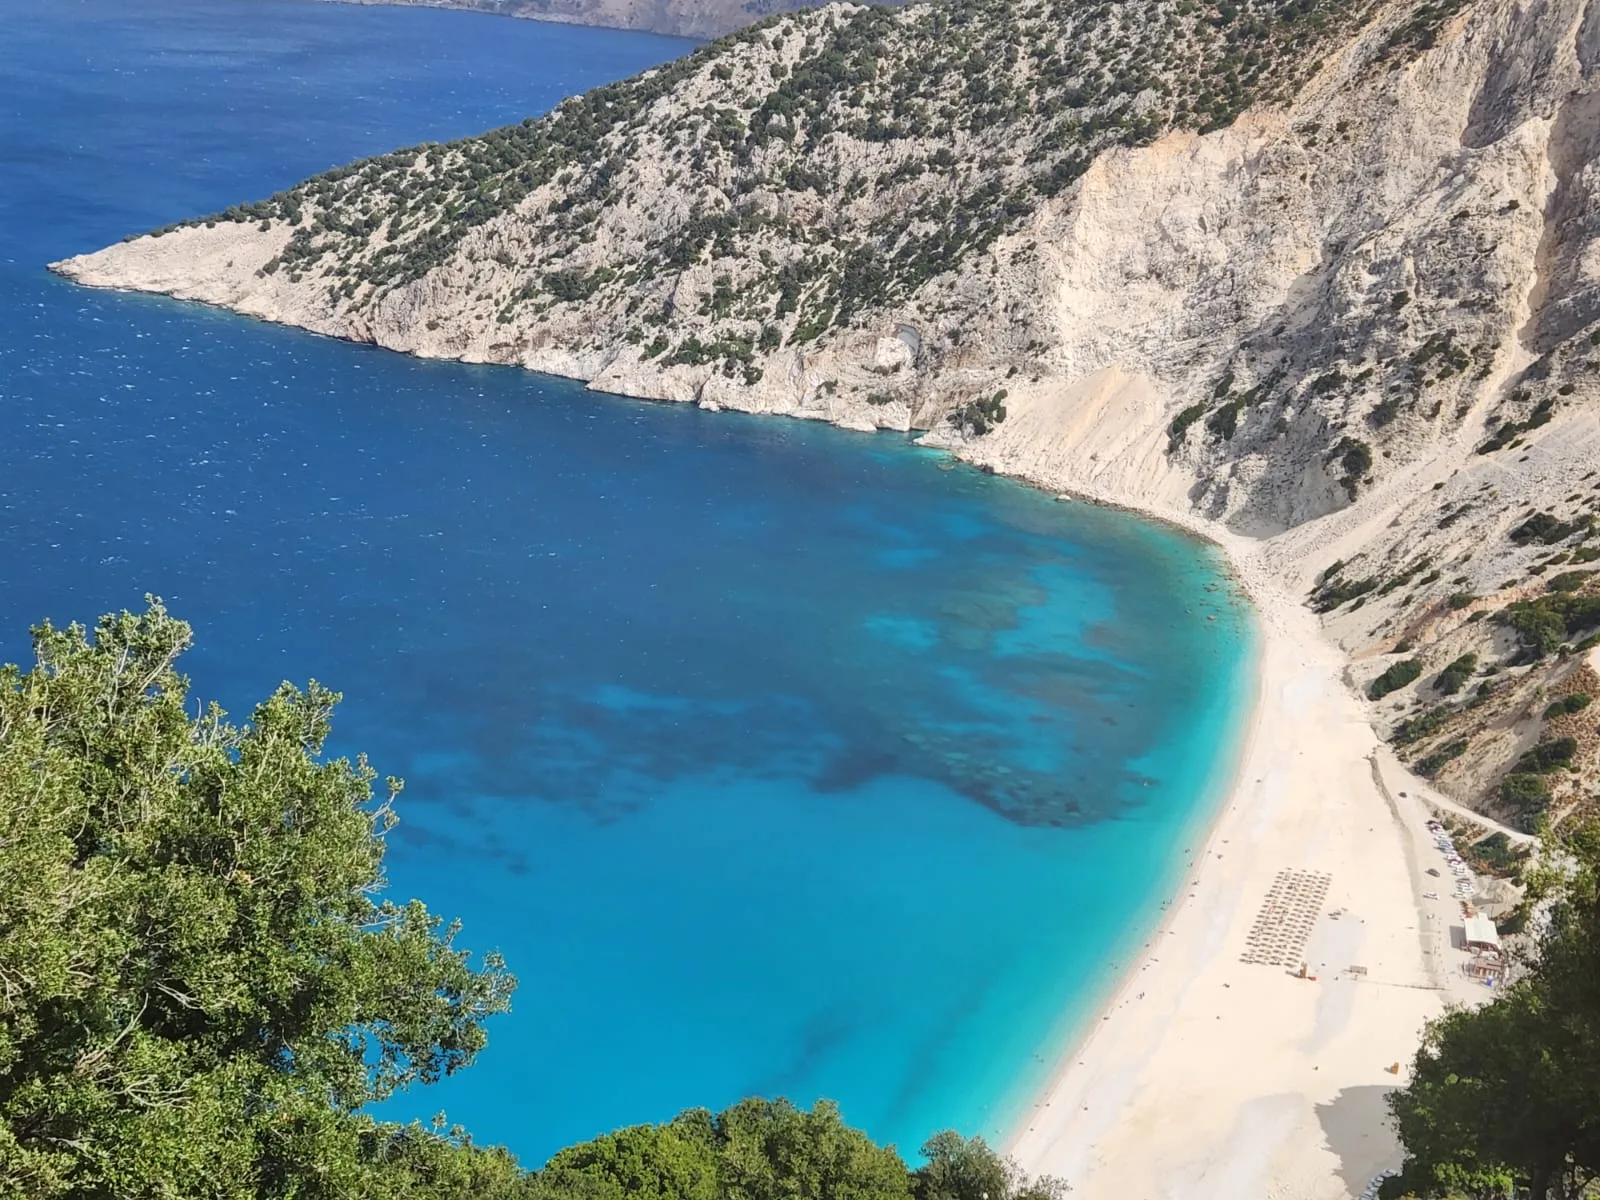 Real traveller photo of a beach on the island of Kefalonia